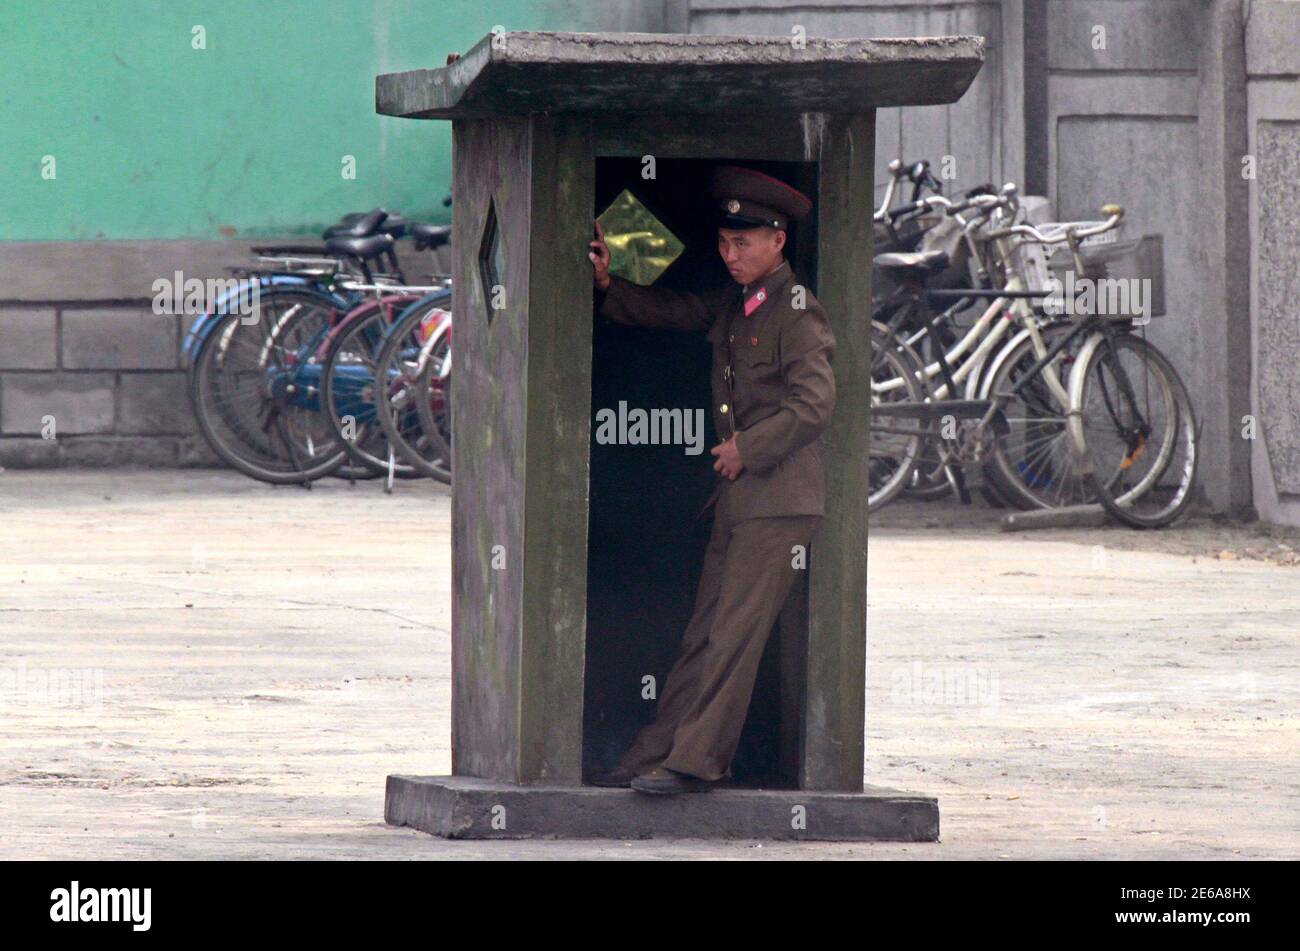 A North Korean soldier stands inside a sentry post along the bank of the Yalu River, near the North Korean town of Sinuiju, opposite the Chinese border city of Dandong, September 20, 2013. REUTERS/Jacky Chen (NORTH KOREA - Tags: MILITARY) Stock Photo